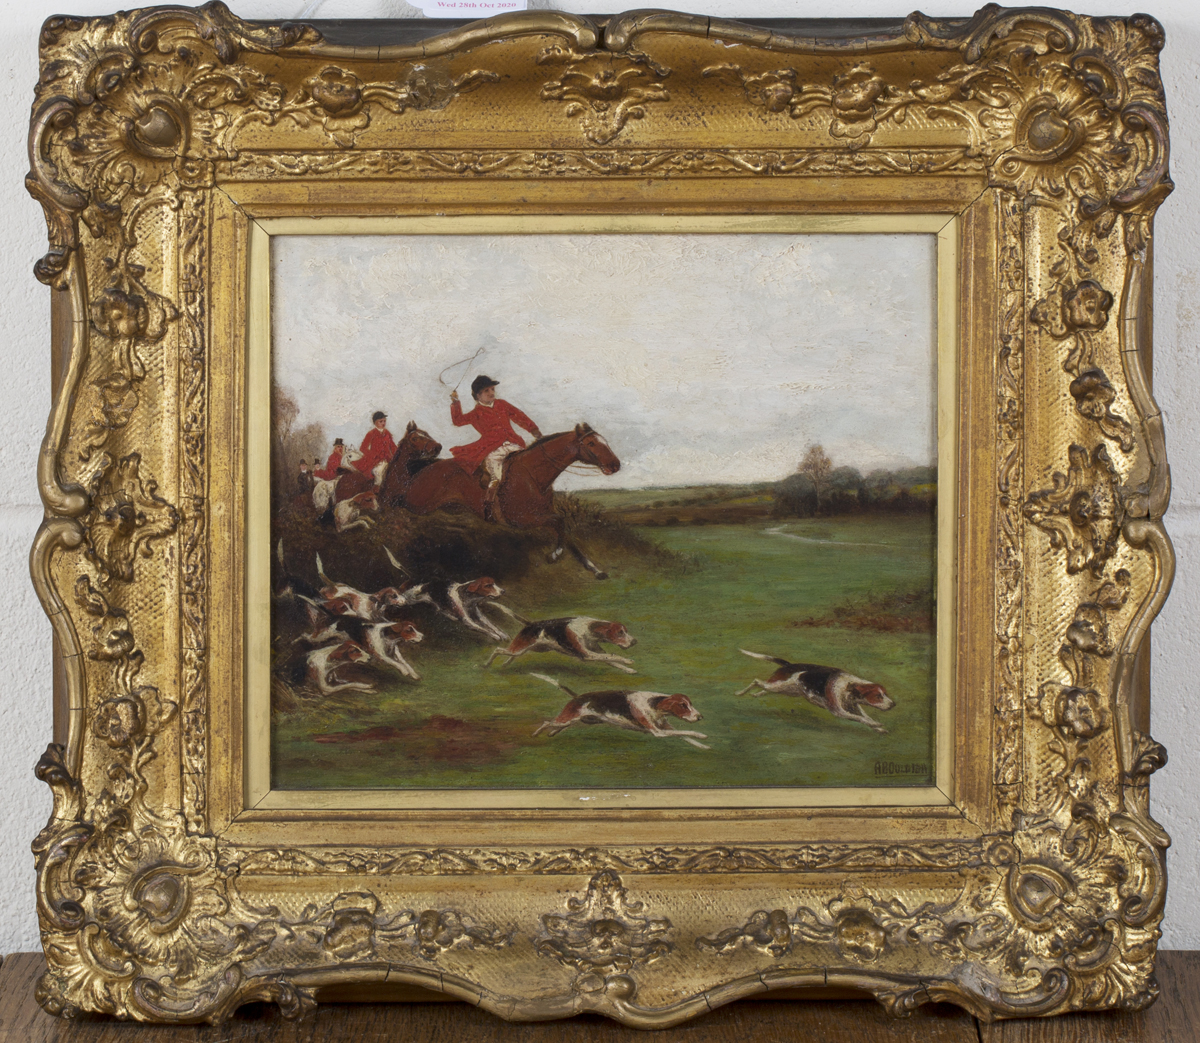 A.B. Ould, Provincial School - Hunting Scene with Huntsmen following Hounds on the Scent, oil on